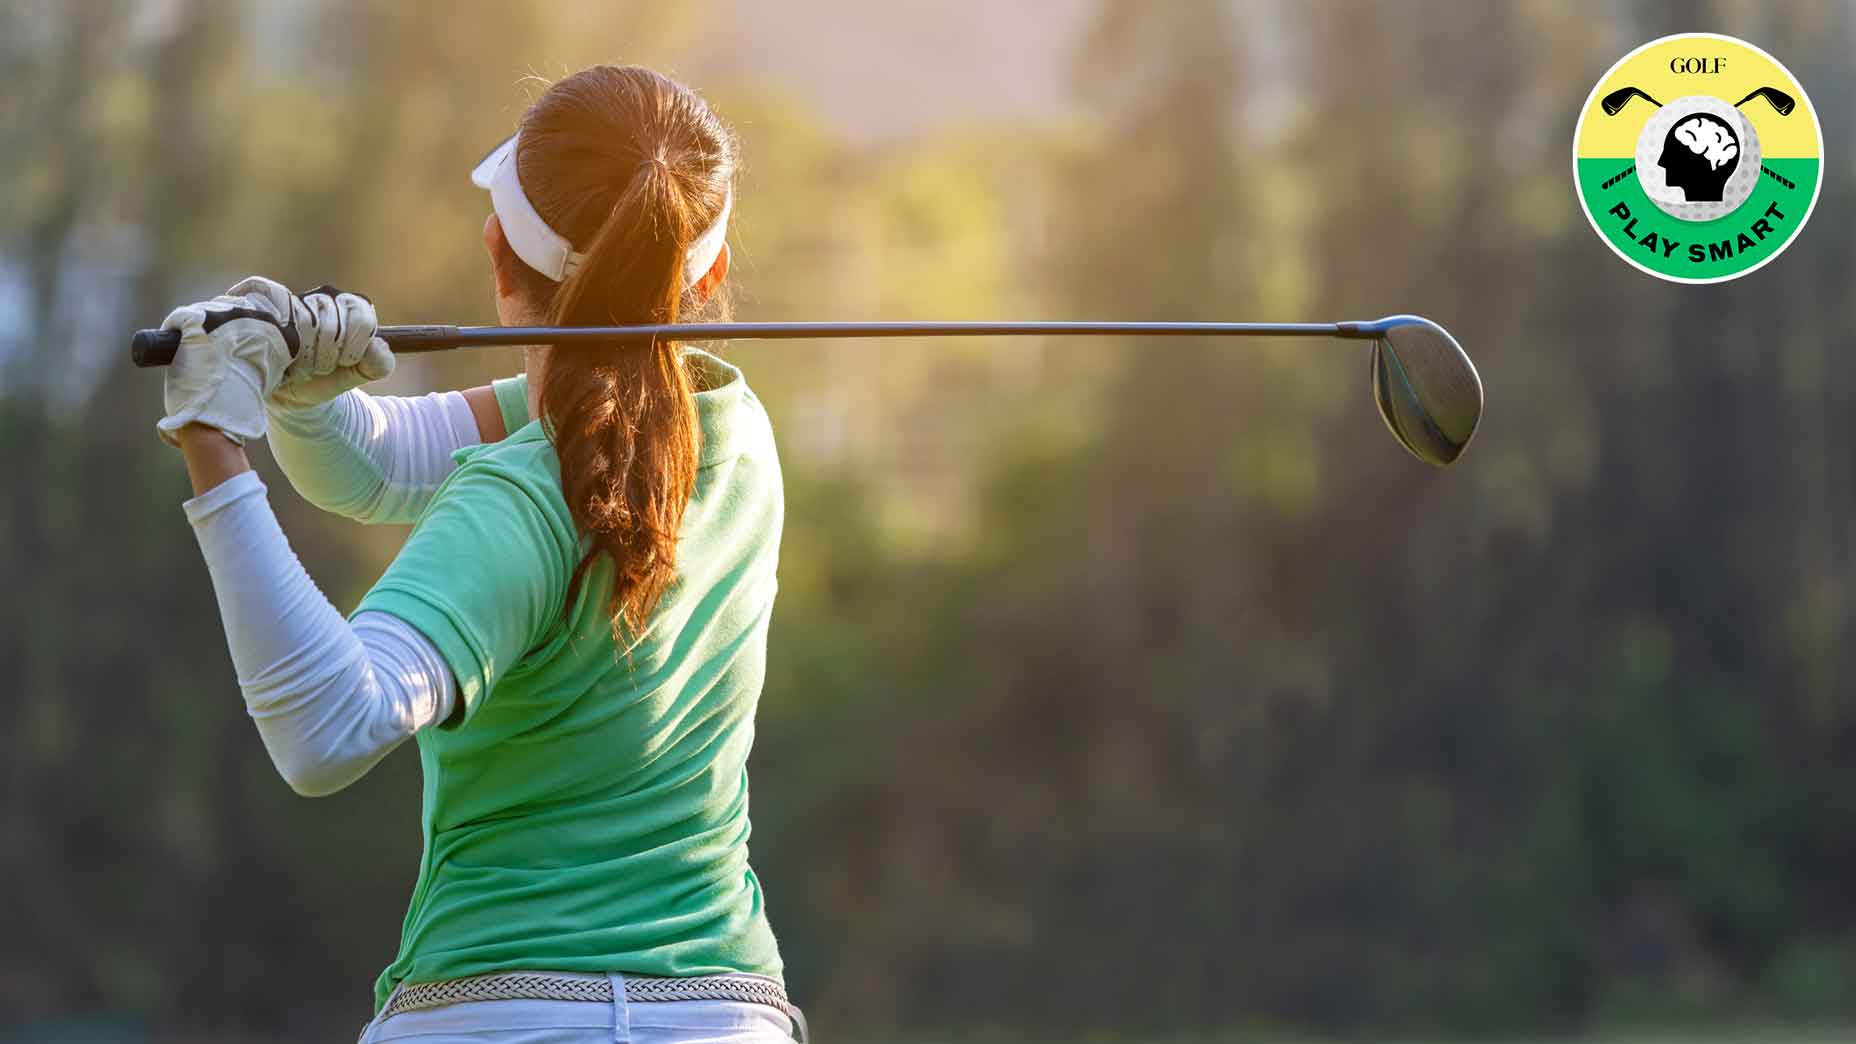 GOLF Top 100 Teacher Tina Tombs shares some tips to increase driver distance, and it all starts with having more pivot in the golf swing